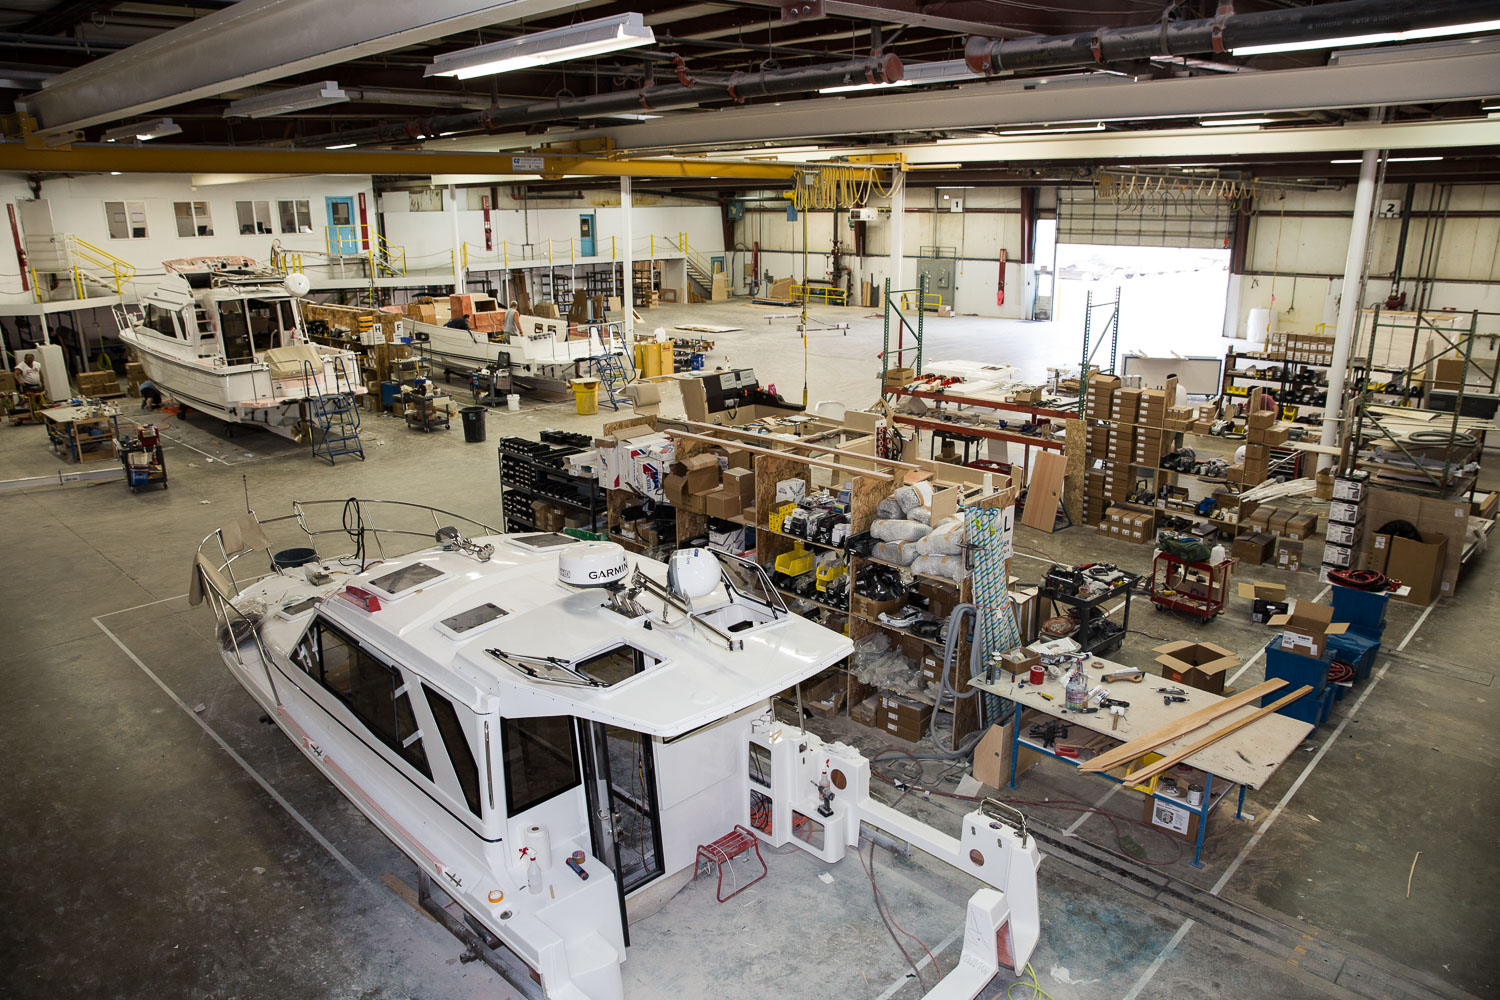 Cutwater Boats and Ranger Tugs are all designed, engineered, and built in-house in Washington State. The parent company, Fluid Motion, has six factories in Arlington, Monroe, Kent, and Auburn